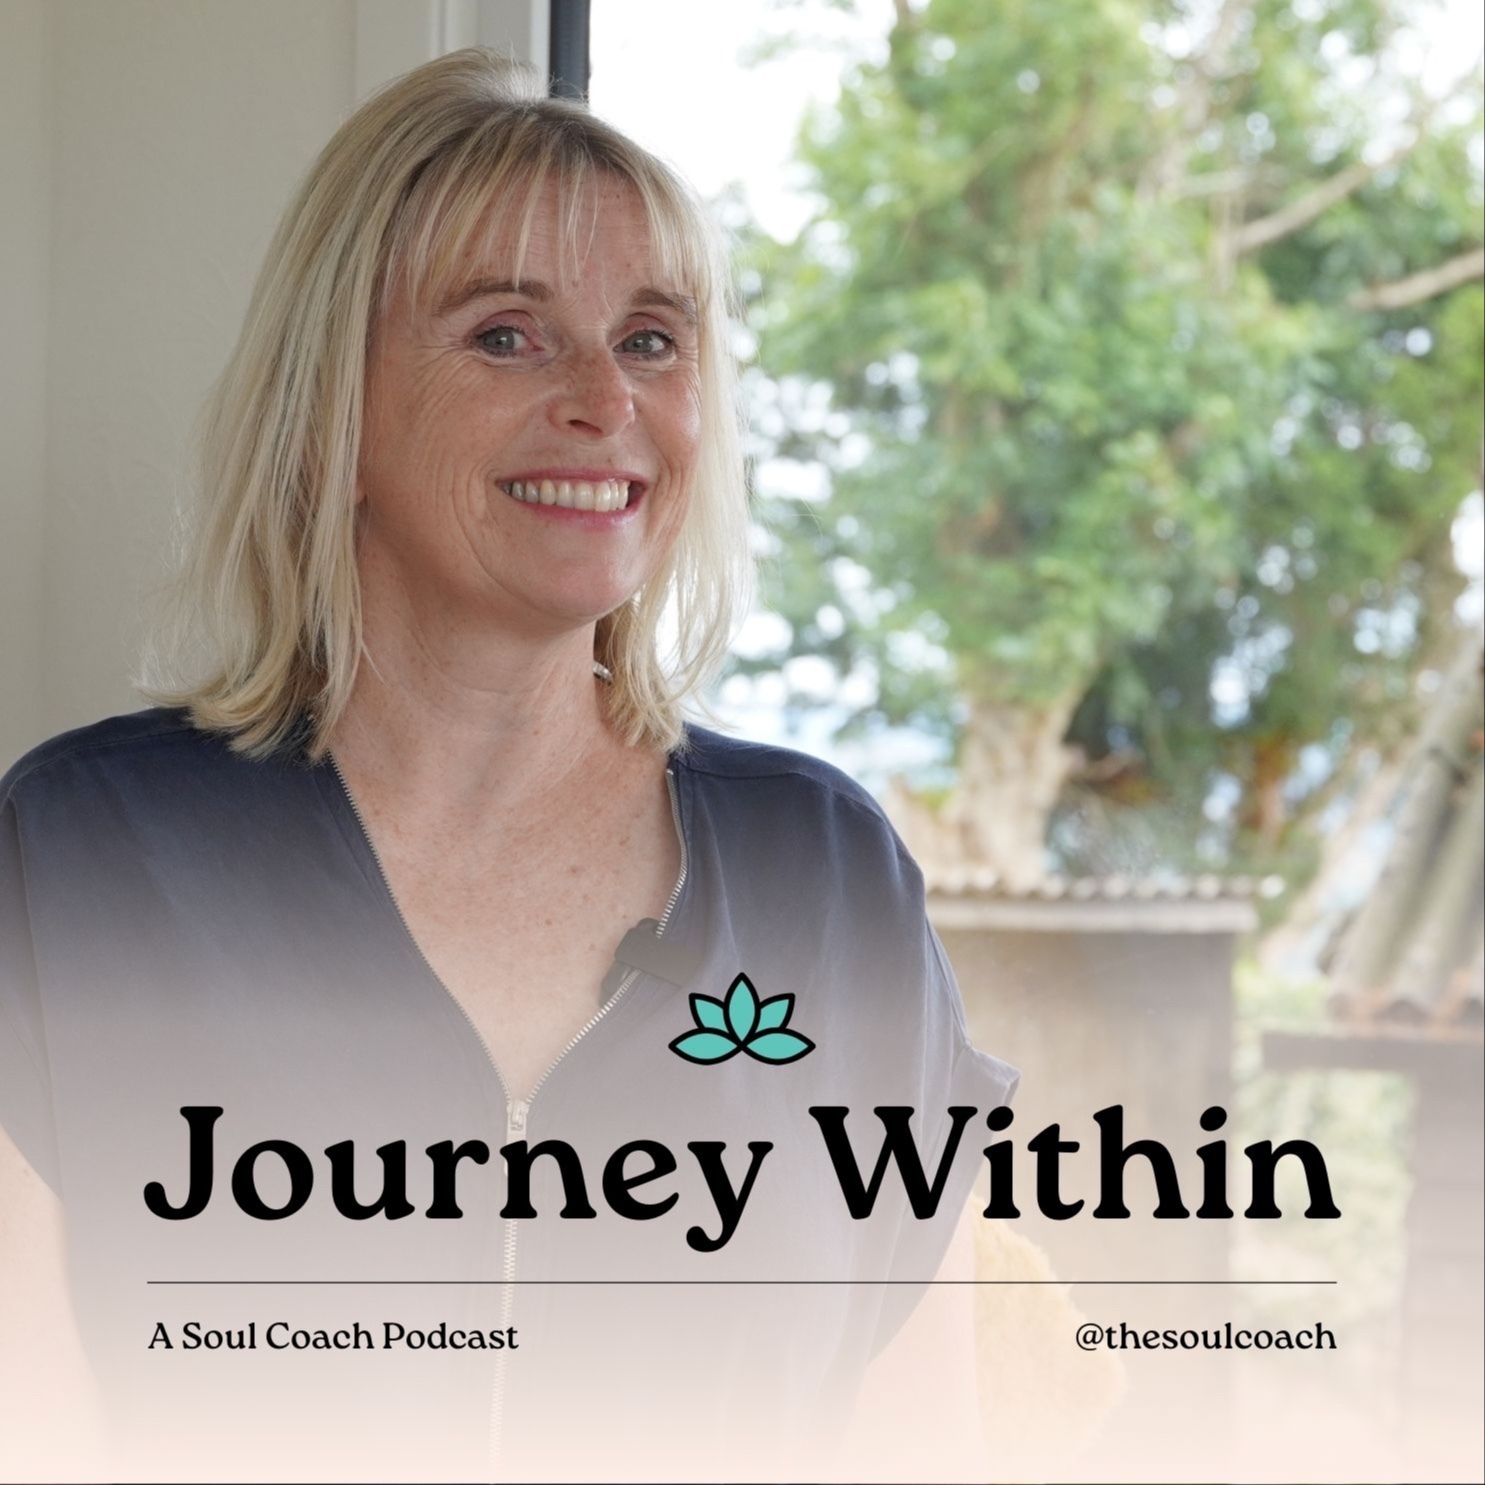 Journey Within - A Soul Coach Podcast